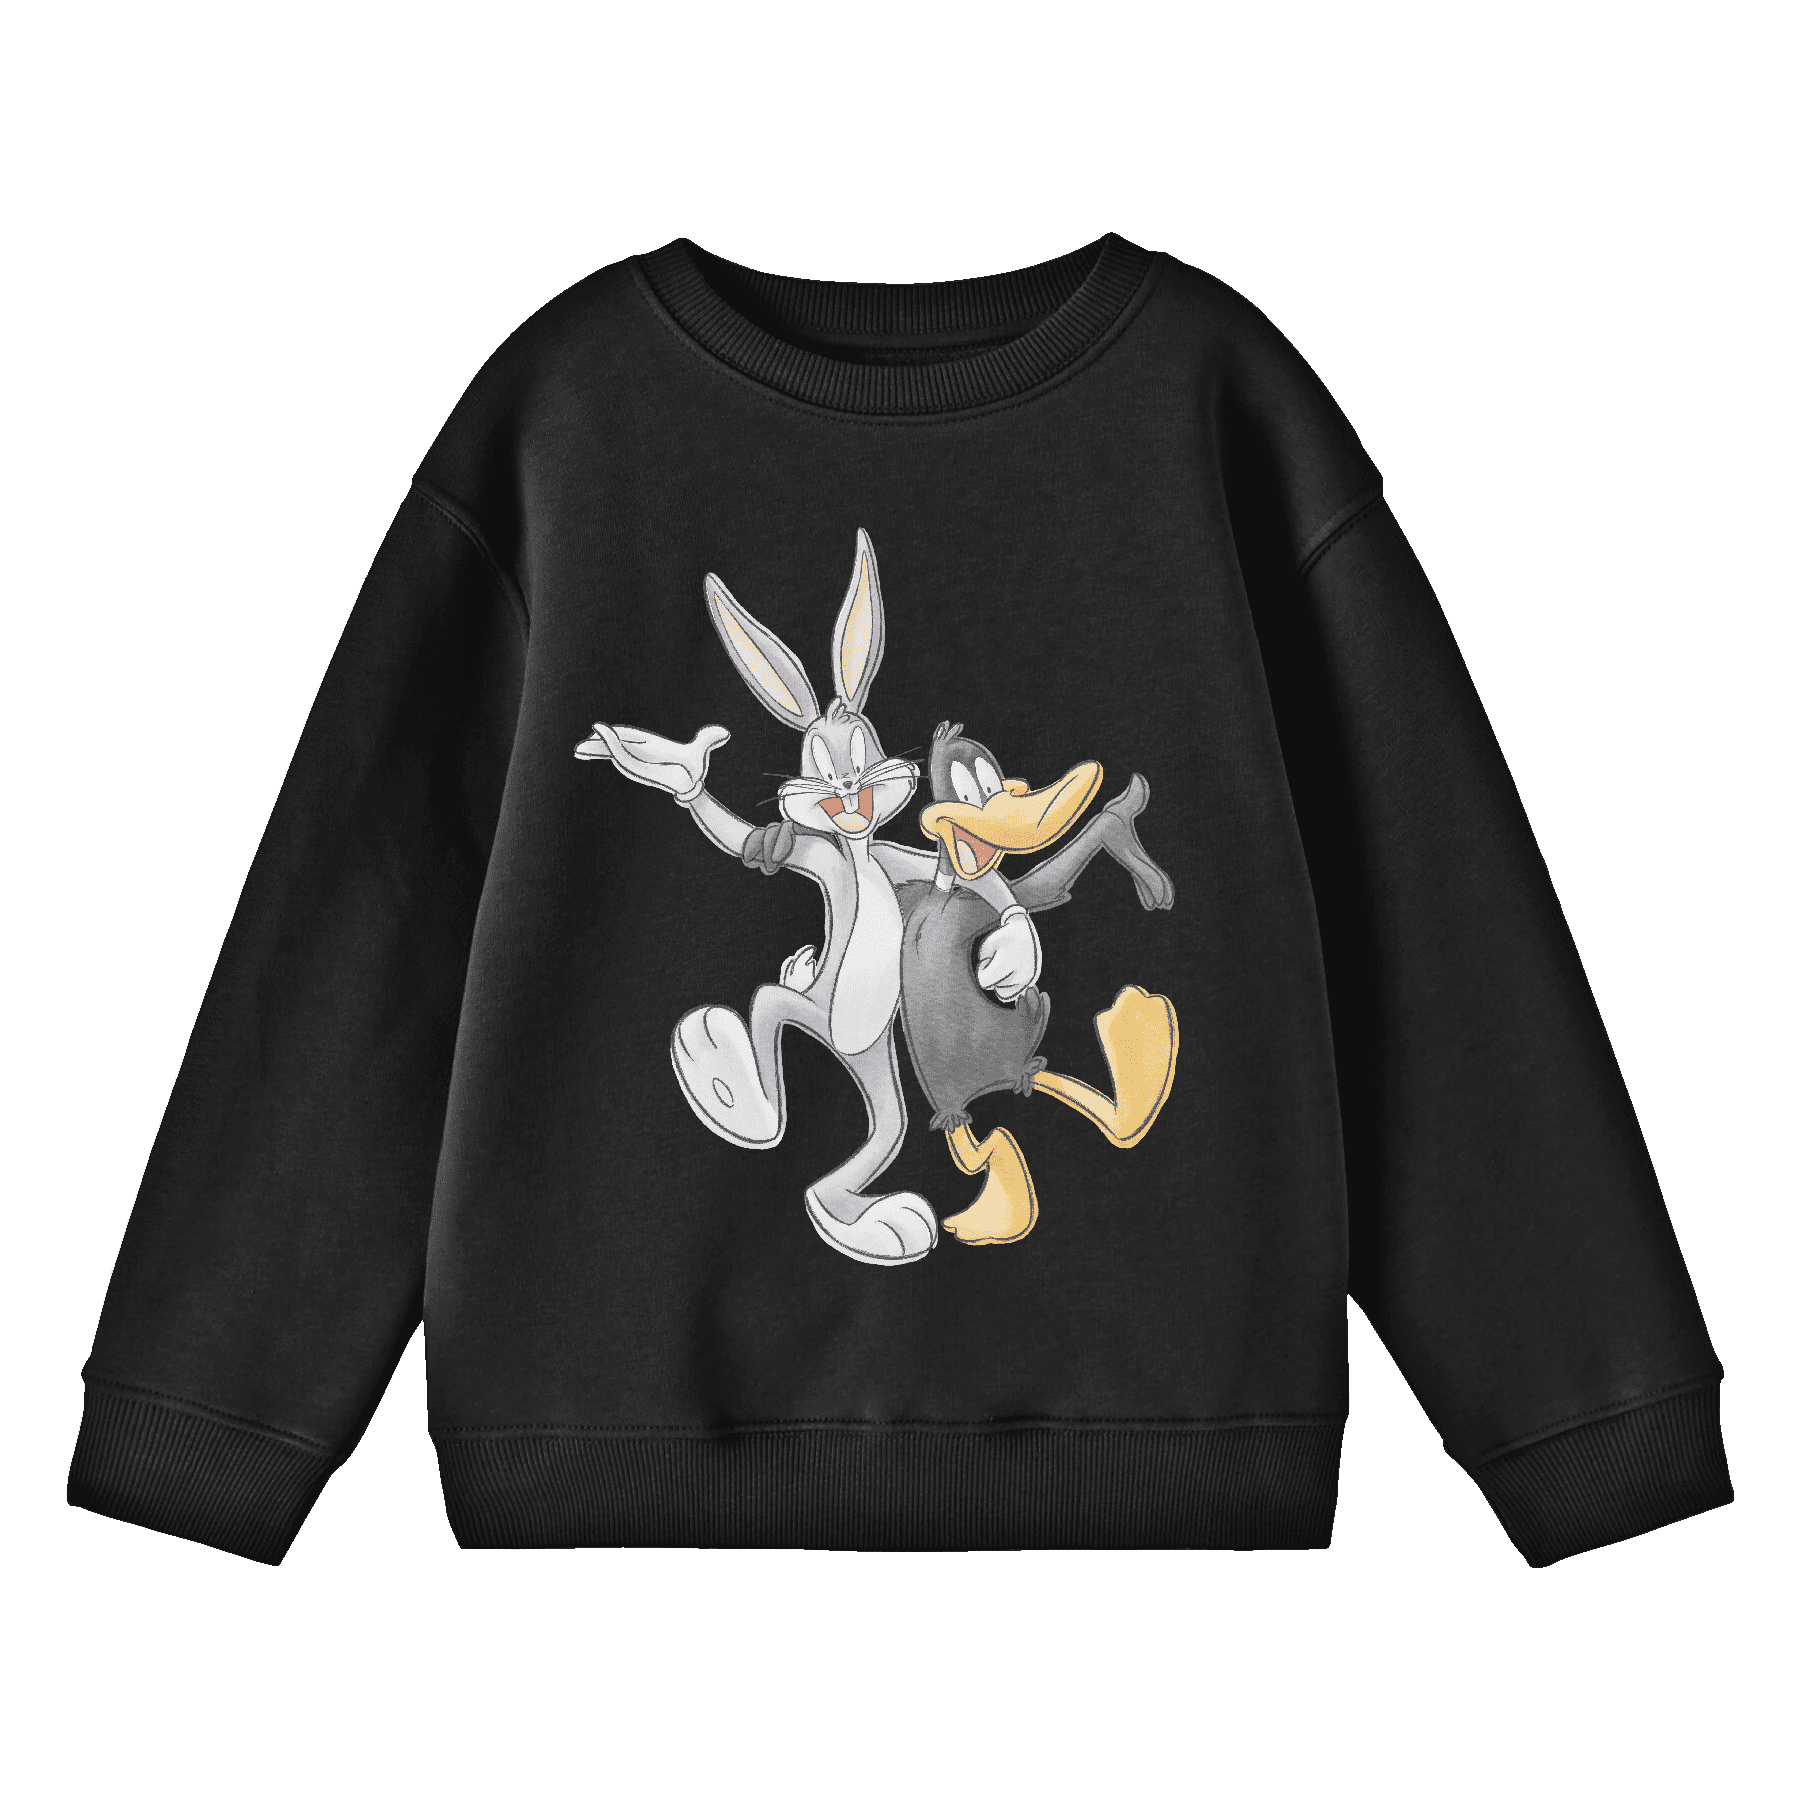 Looney Tunes Bugs Bunny and Daffy Duck Youth Black Crew Neck Sweatshirt- Large